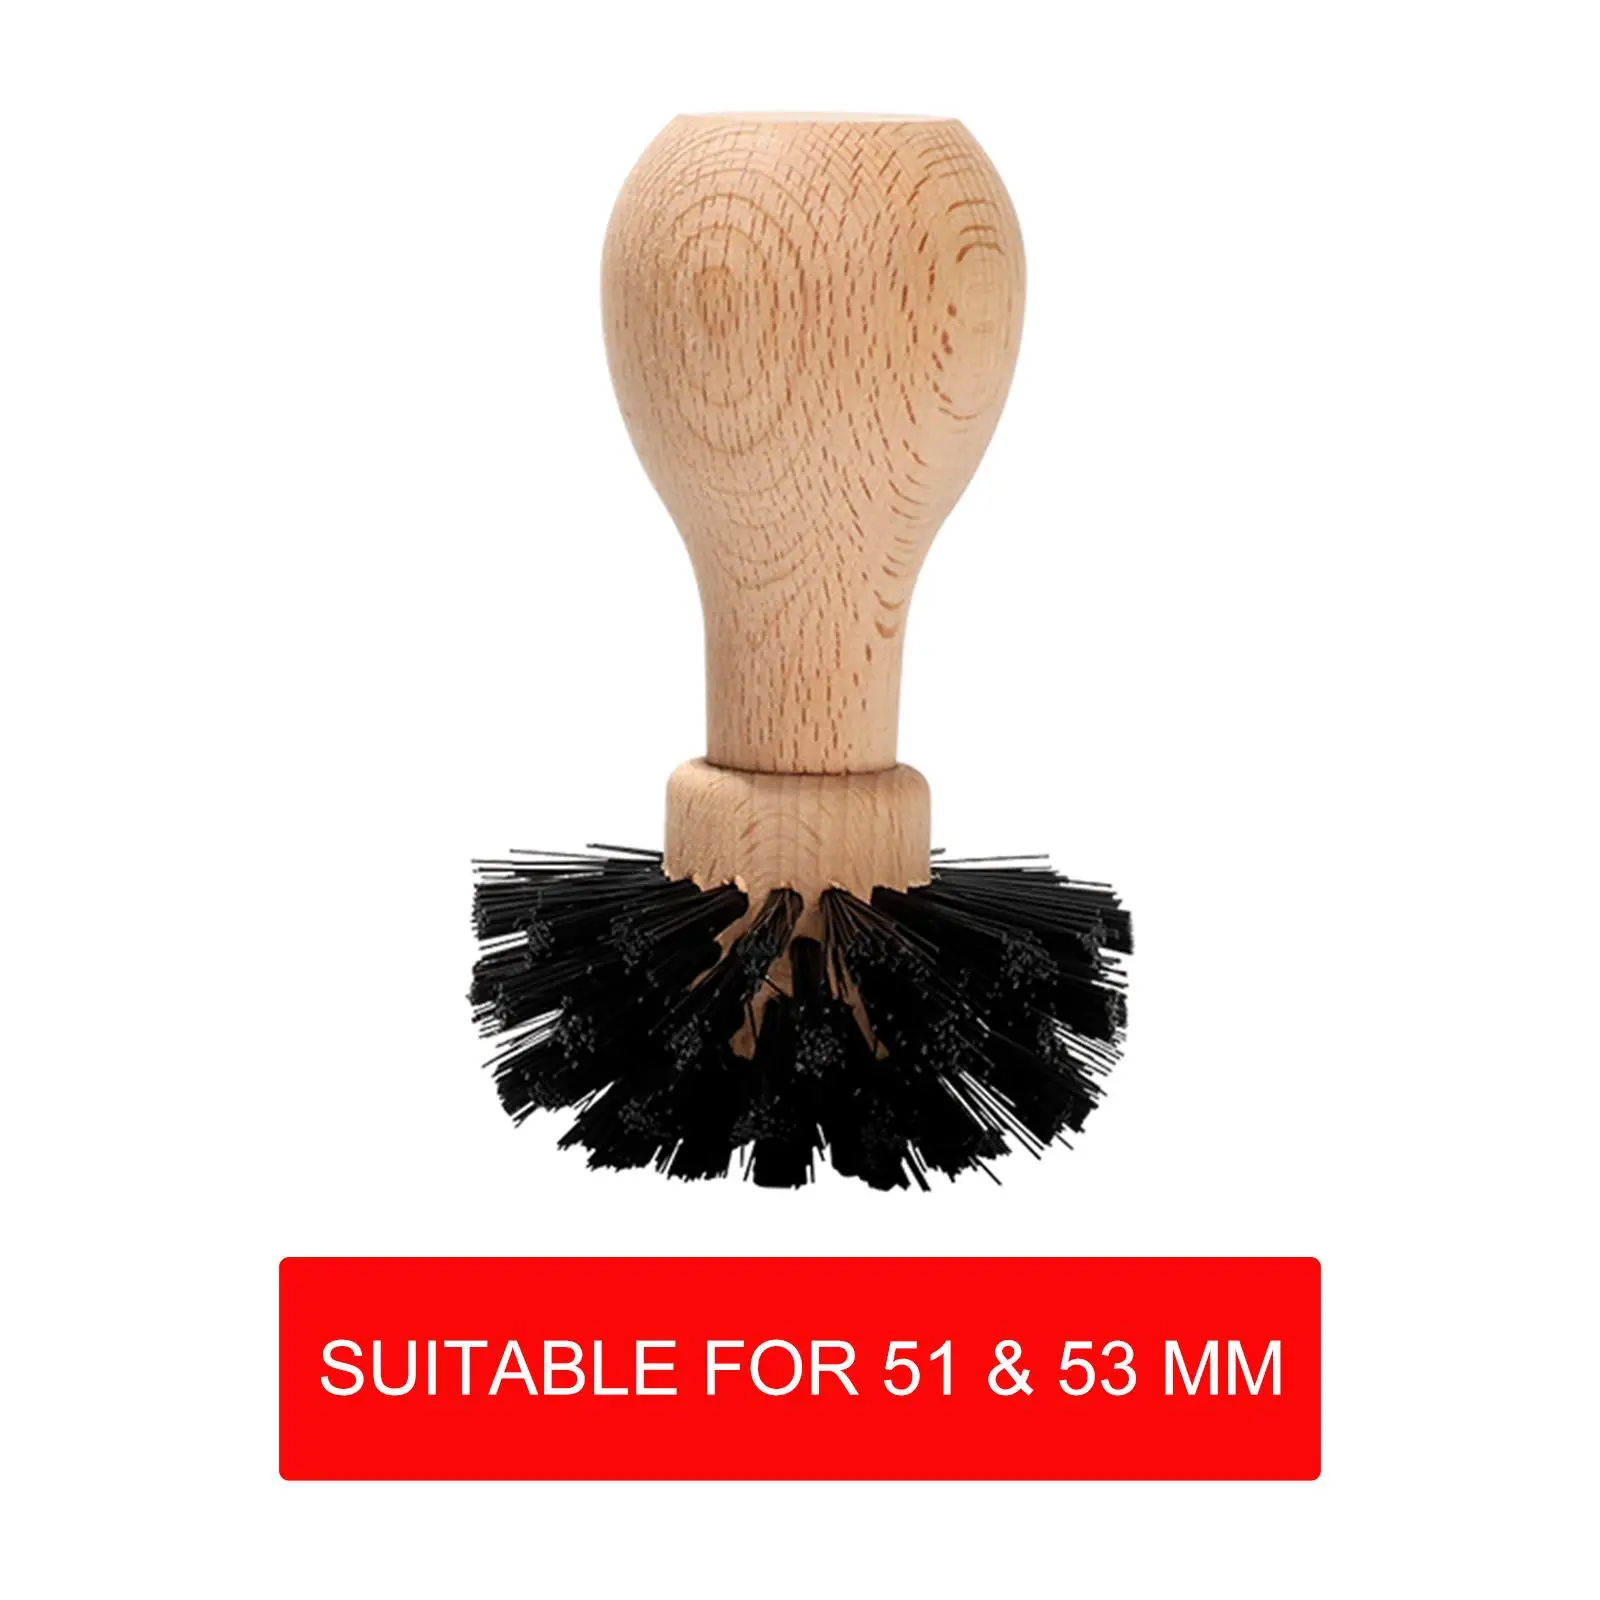 Espresso Tamper Cleaning Brush with Wooden Handle for 51mm 53mm Basket Home